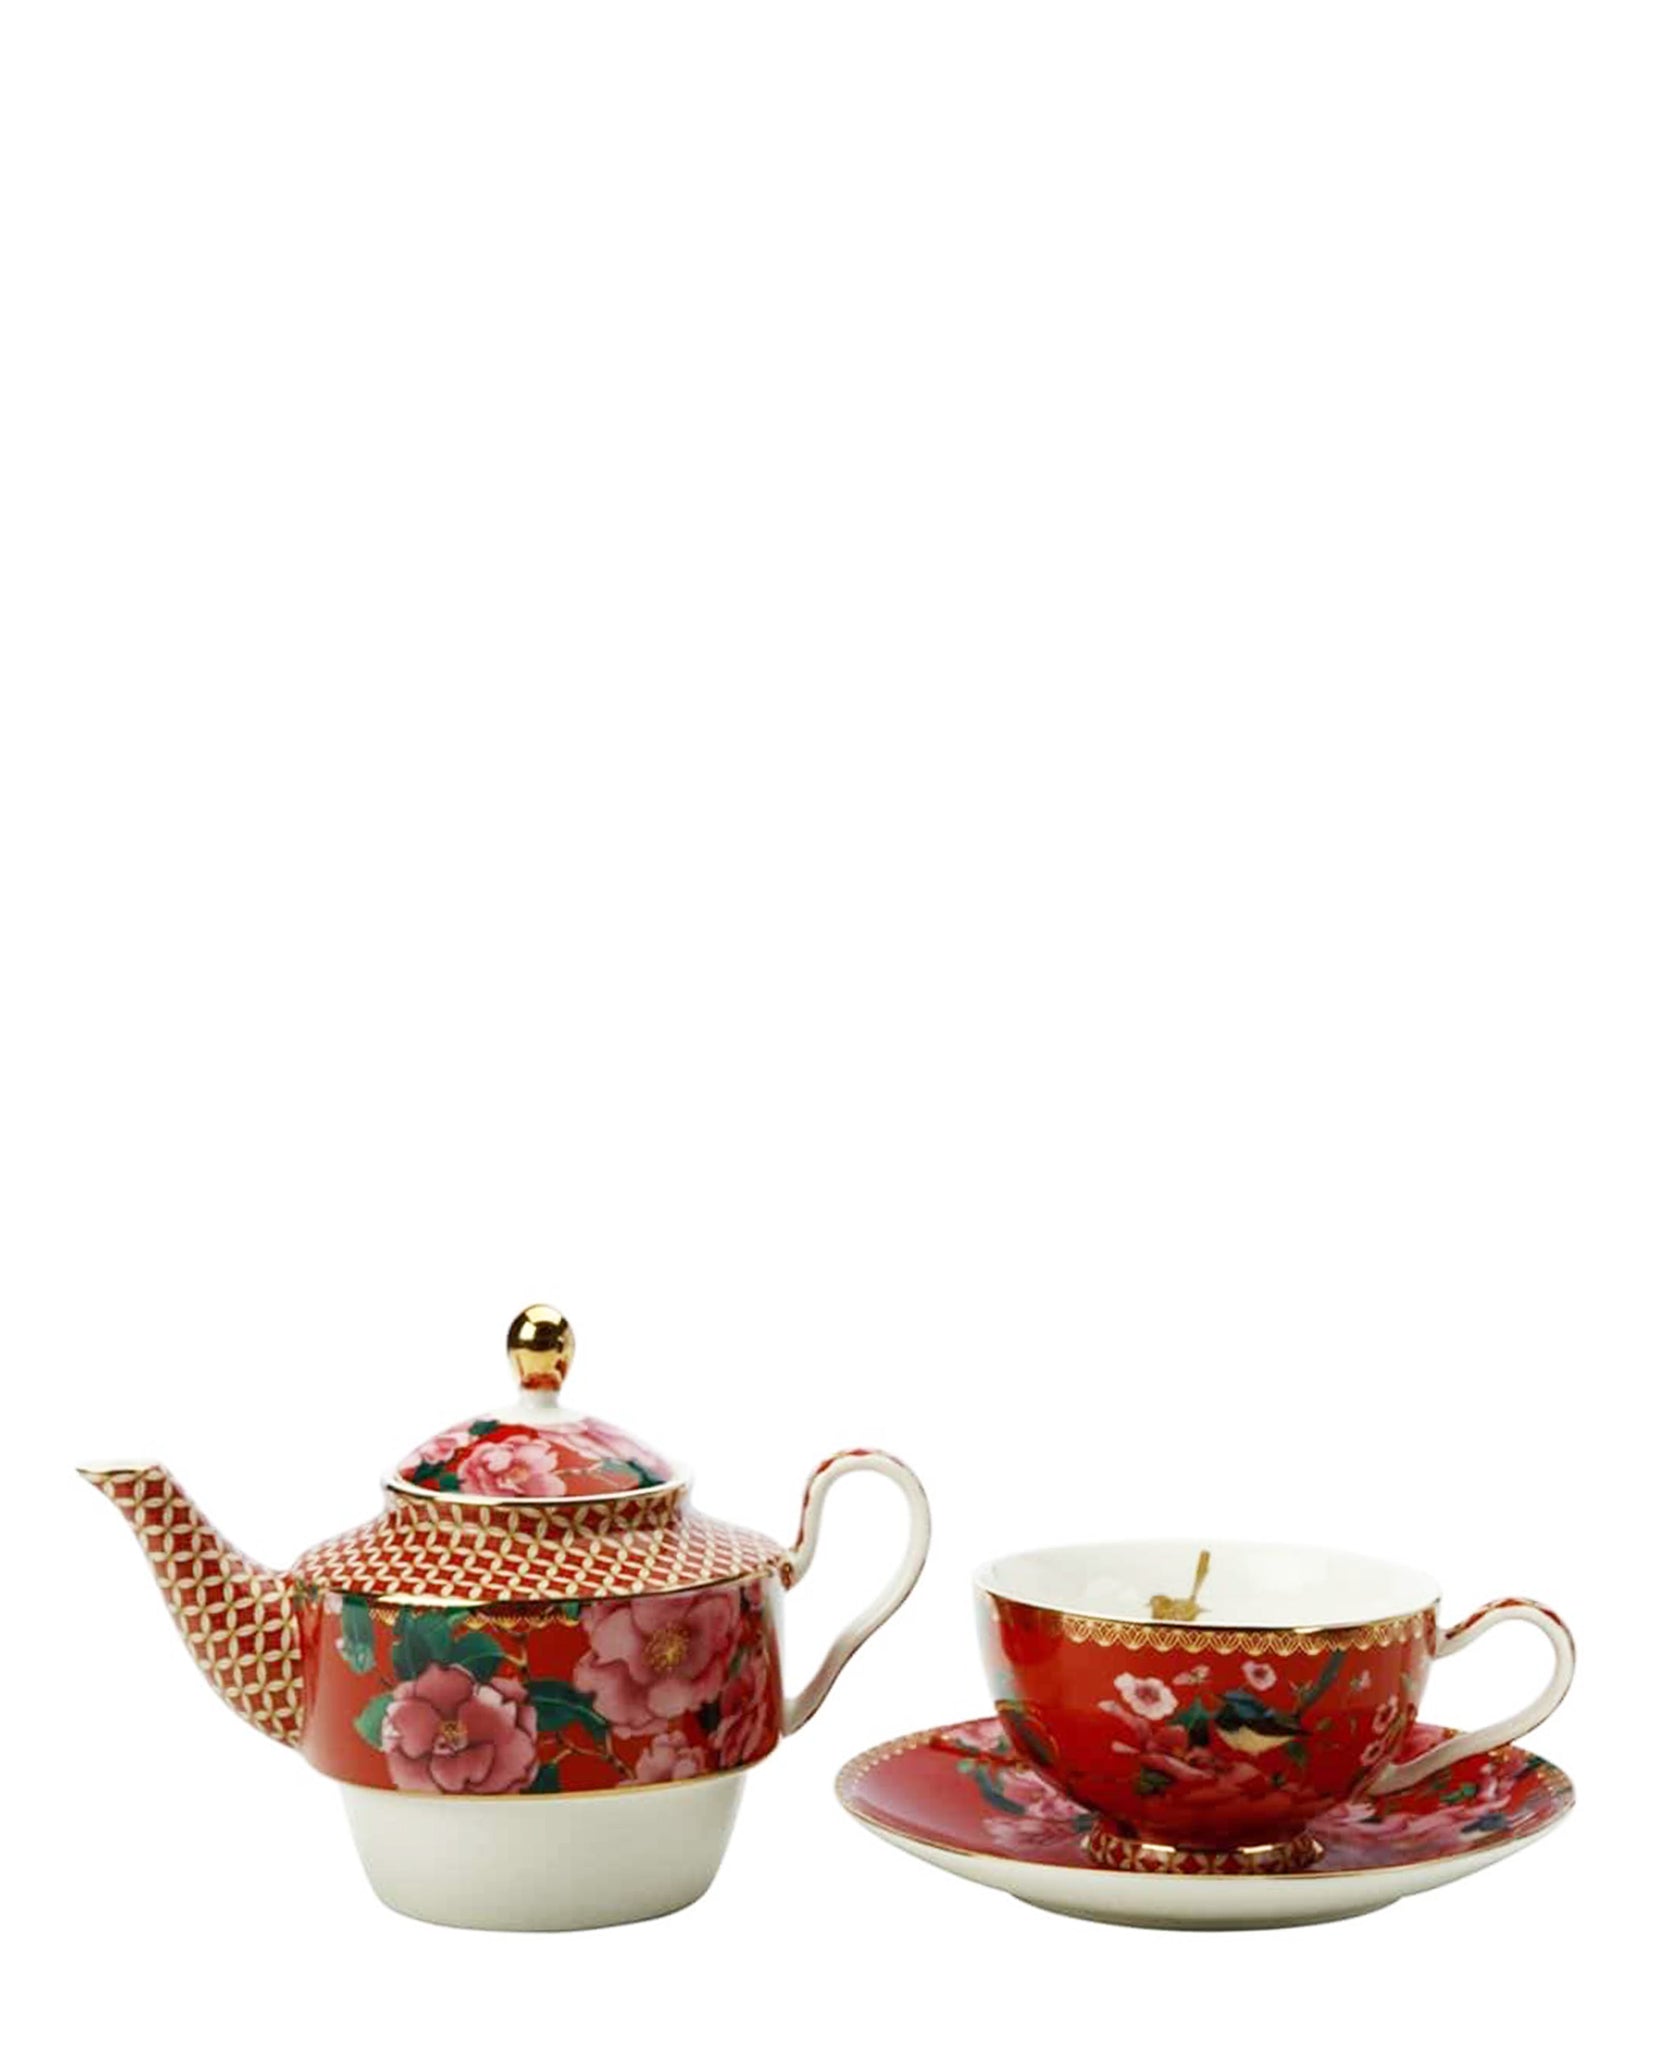 Maxwell Williams Teas & C's Silk Road Tea For One with Infuser 380ML - Cherry Red